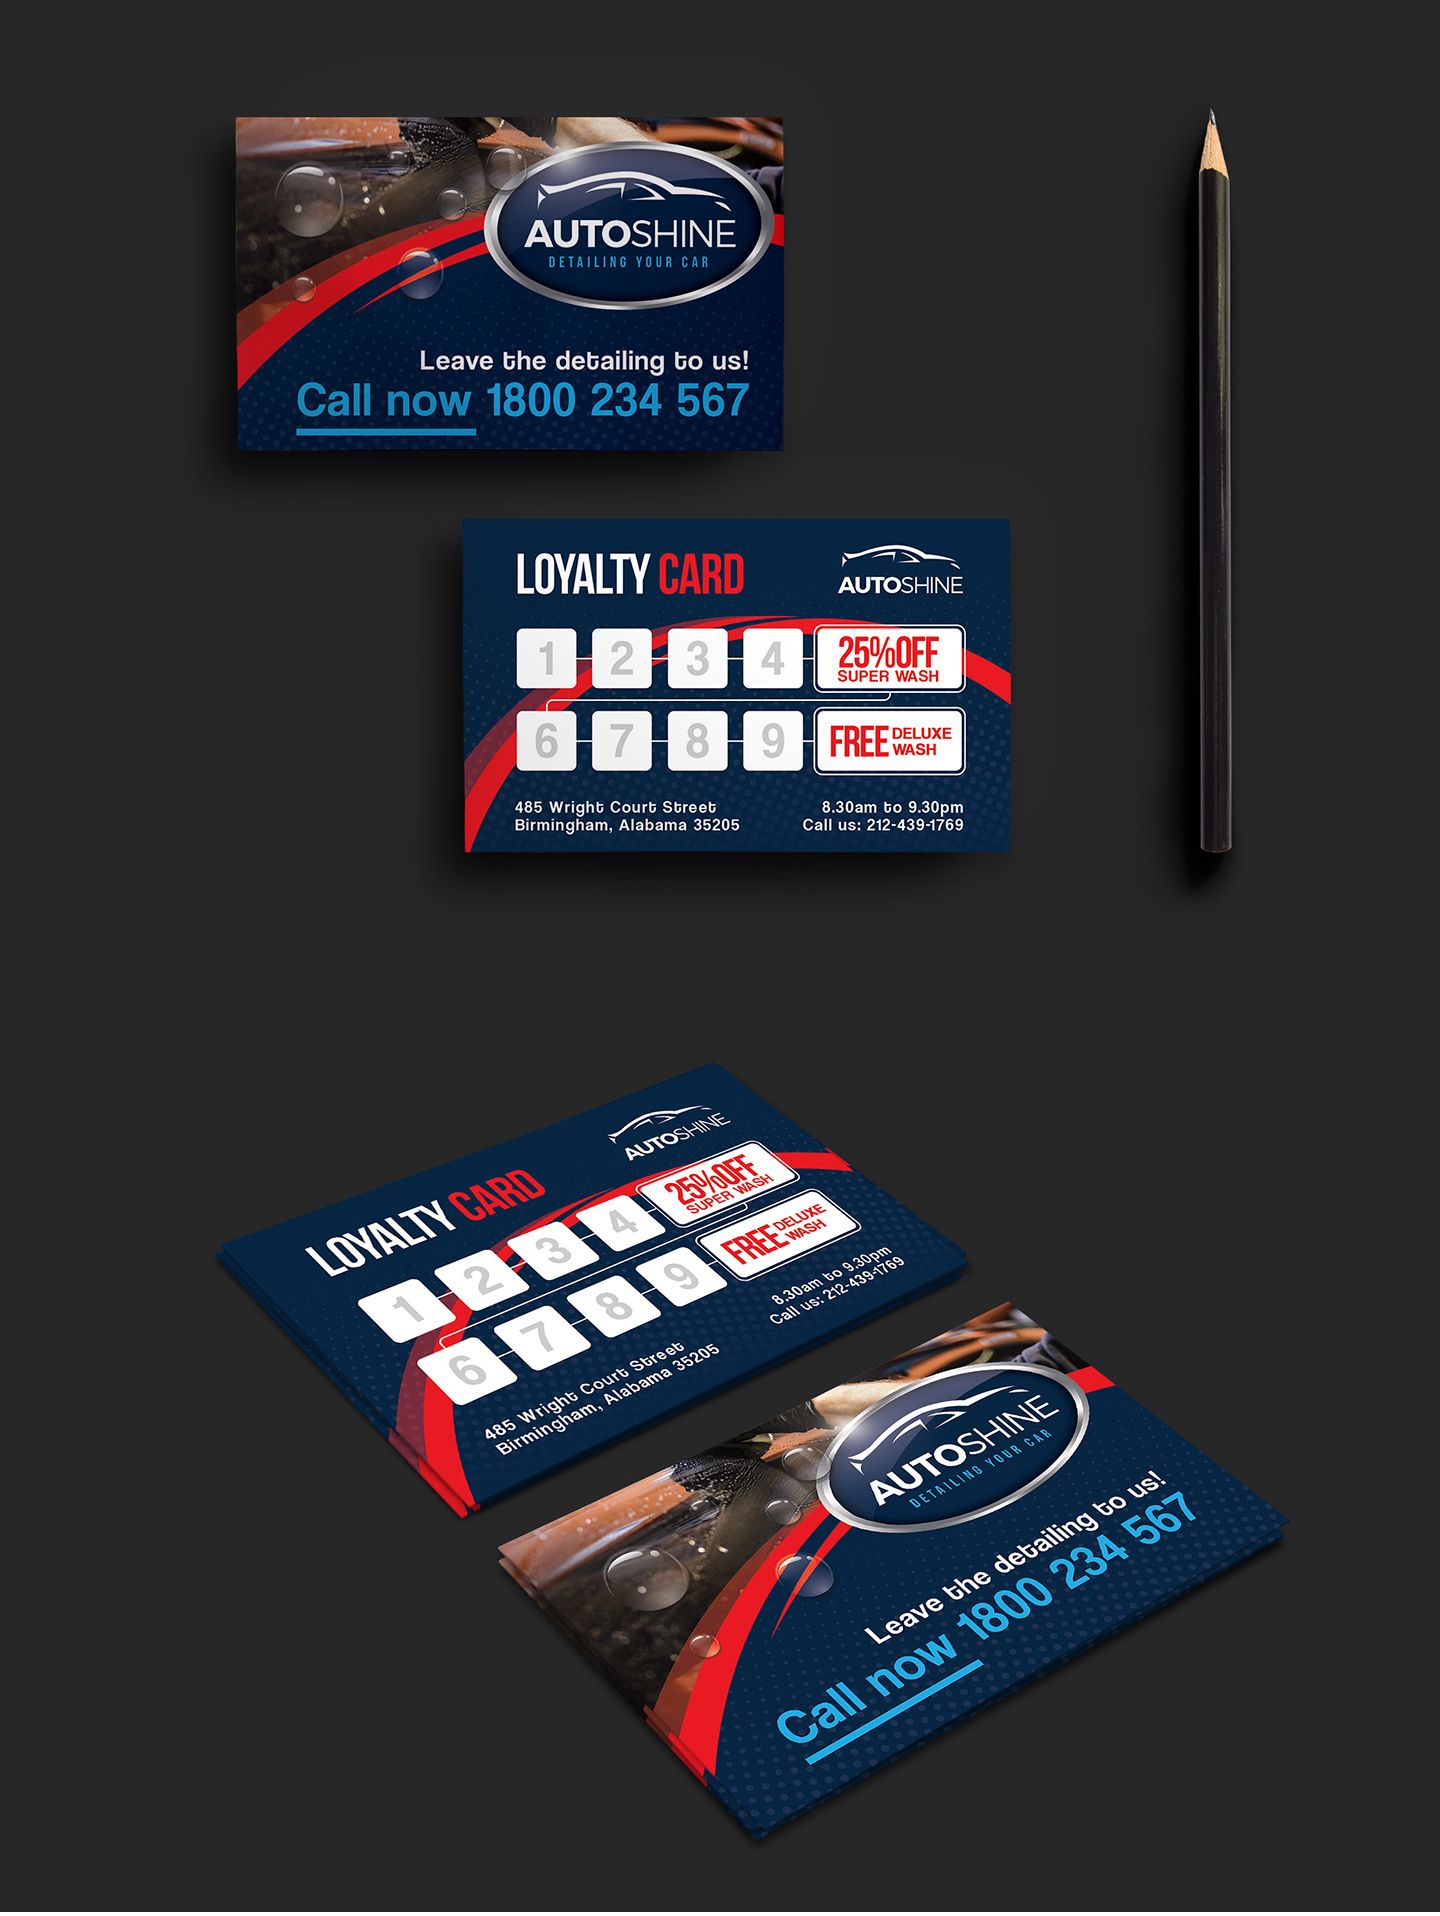 Loyalty Card Templates For Your Small Business Needs  CandyBar.co Within Customer Loyalty Card Template Free